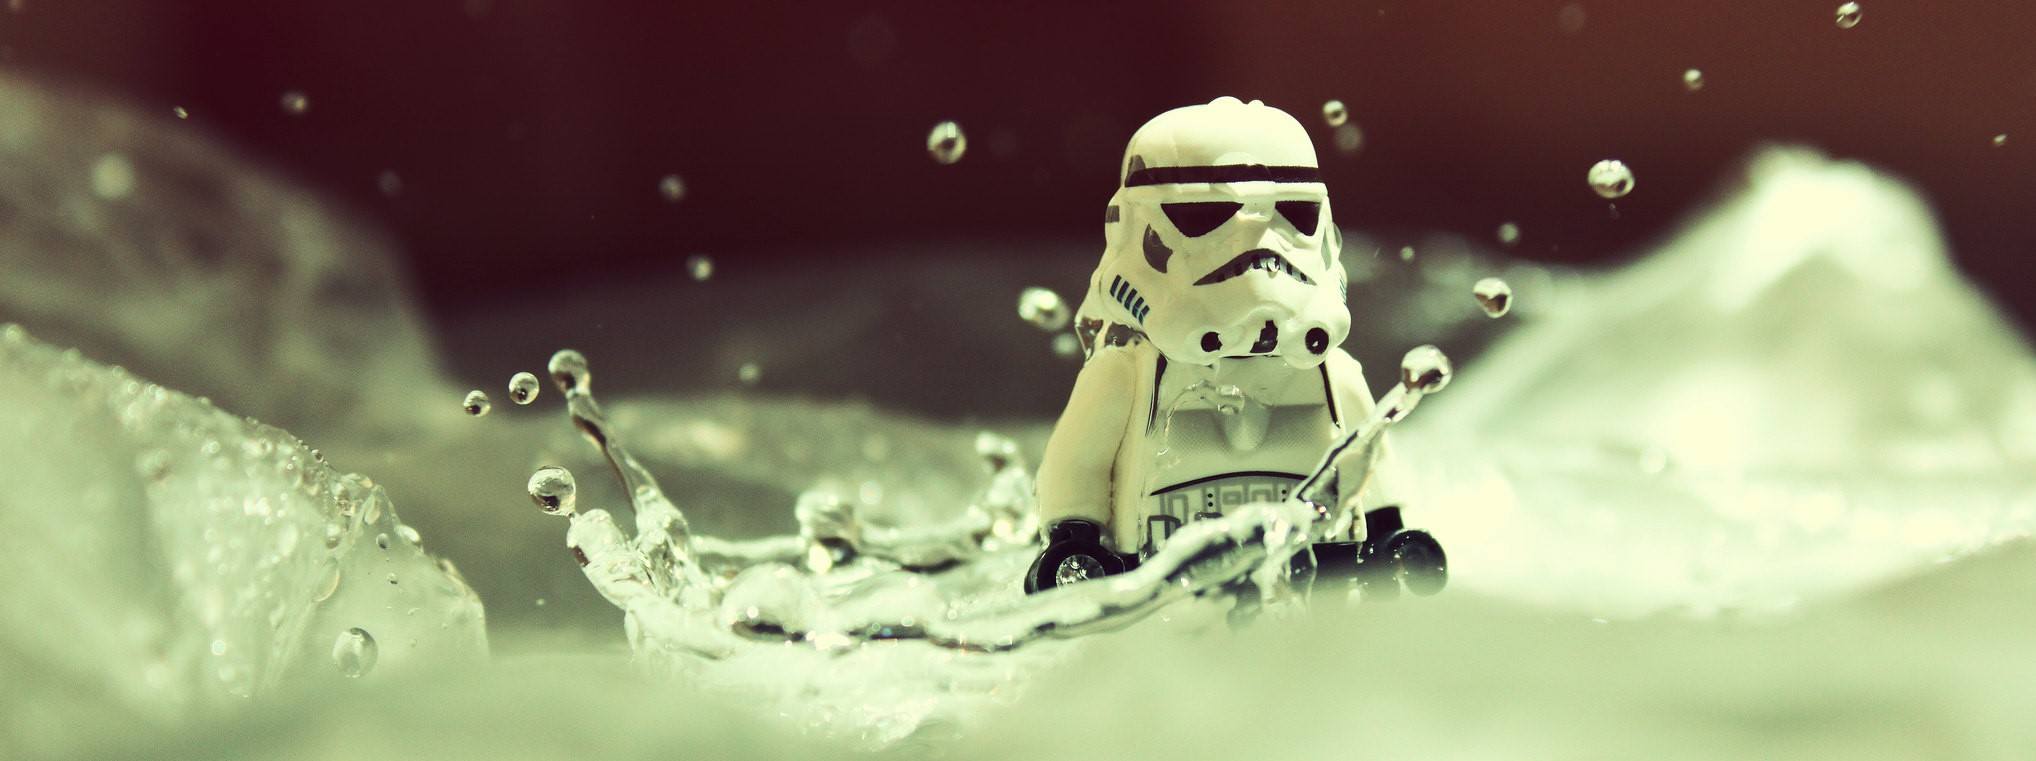 A Stormtrooper in water, which is way too much water for him to drink.